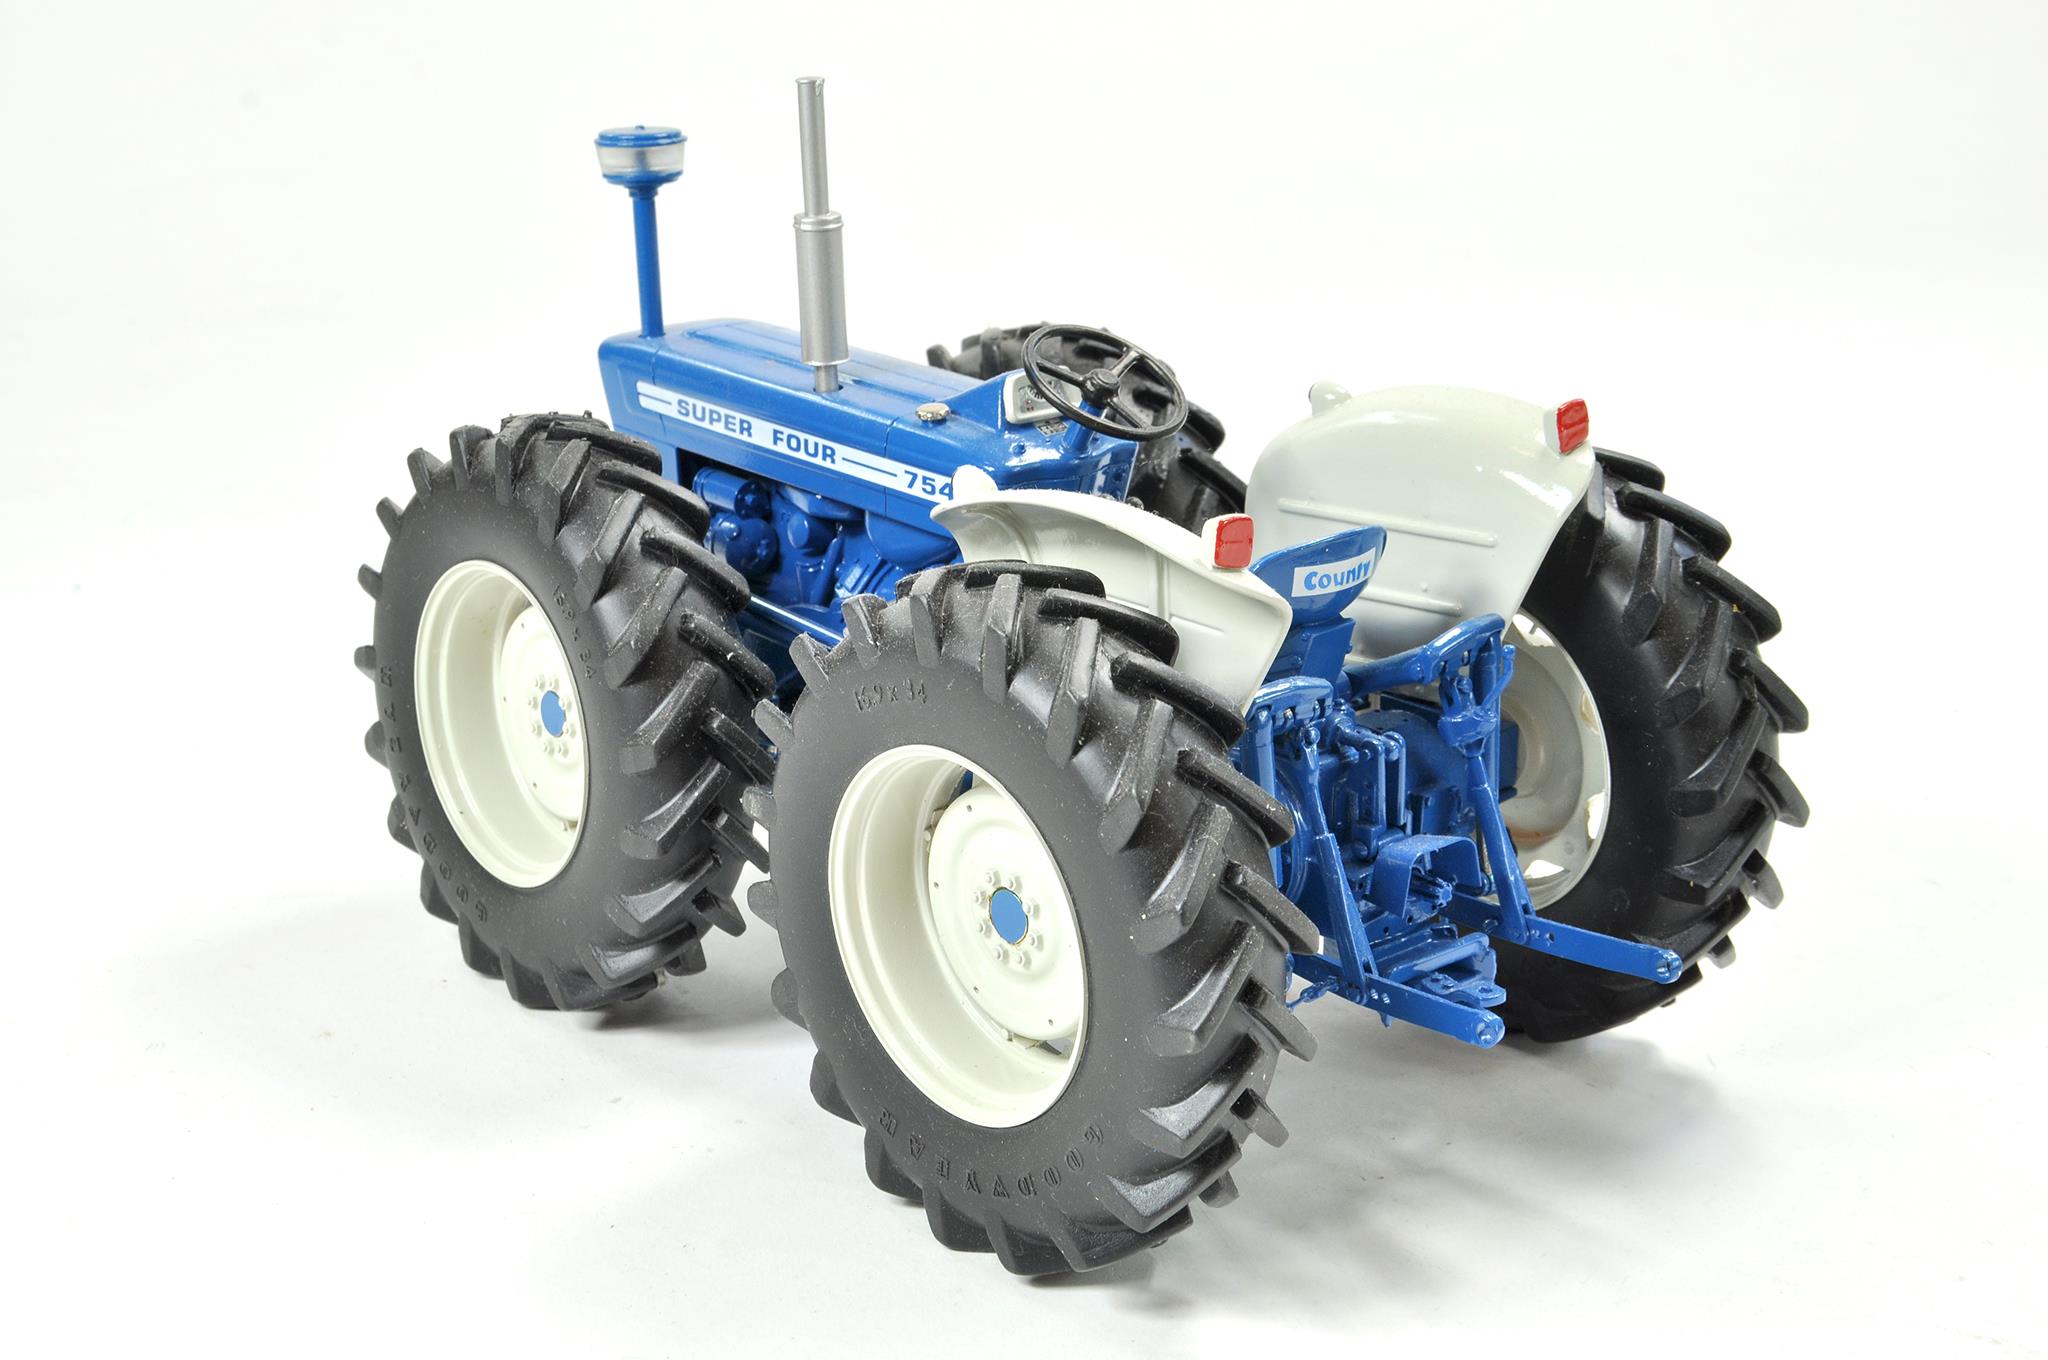 DBP Model Tractors 1/16 Farm Issue comprising County 754 Super Four Tractor. Appears excellent, - Image 4 of 4